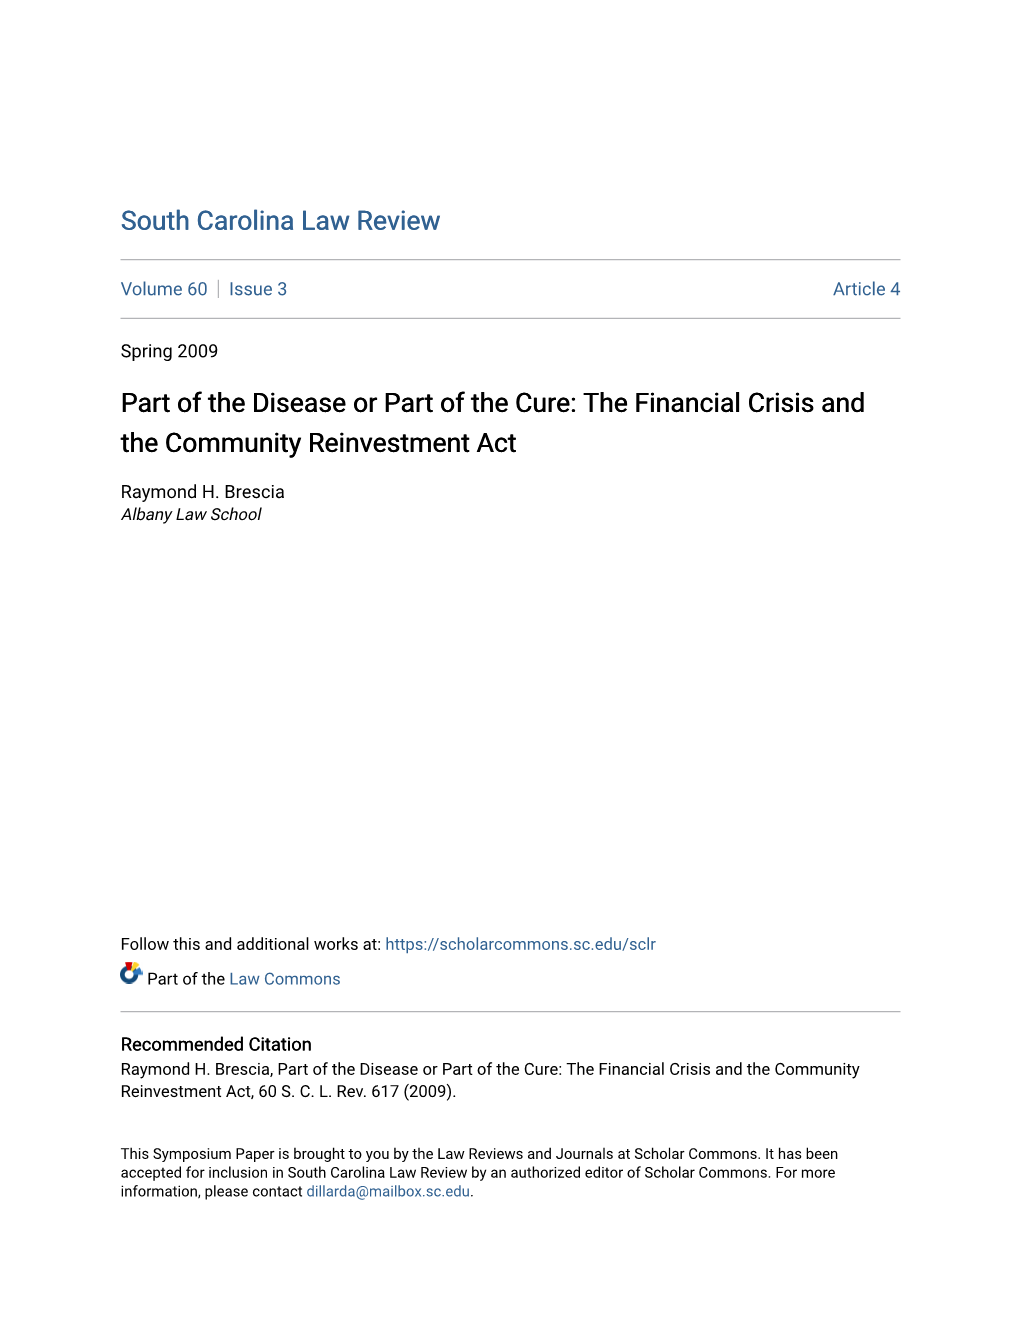 Part of the Disease Or Part of the Cure: the Financial Crisis and the Community Reinvestment Act